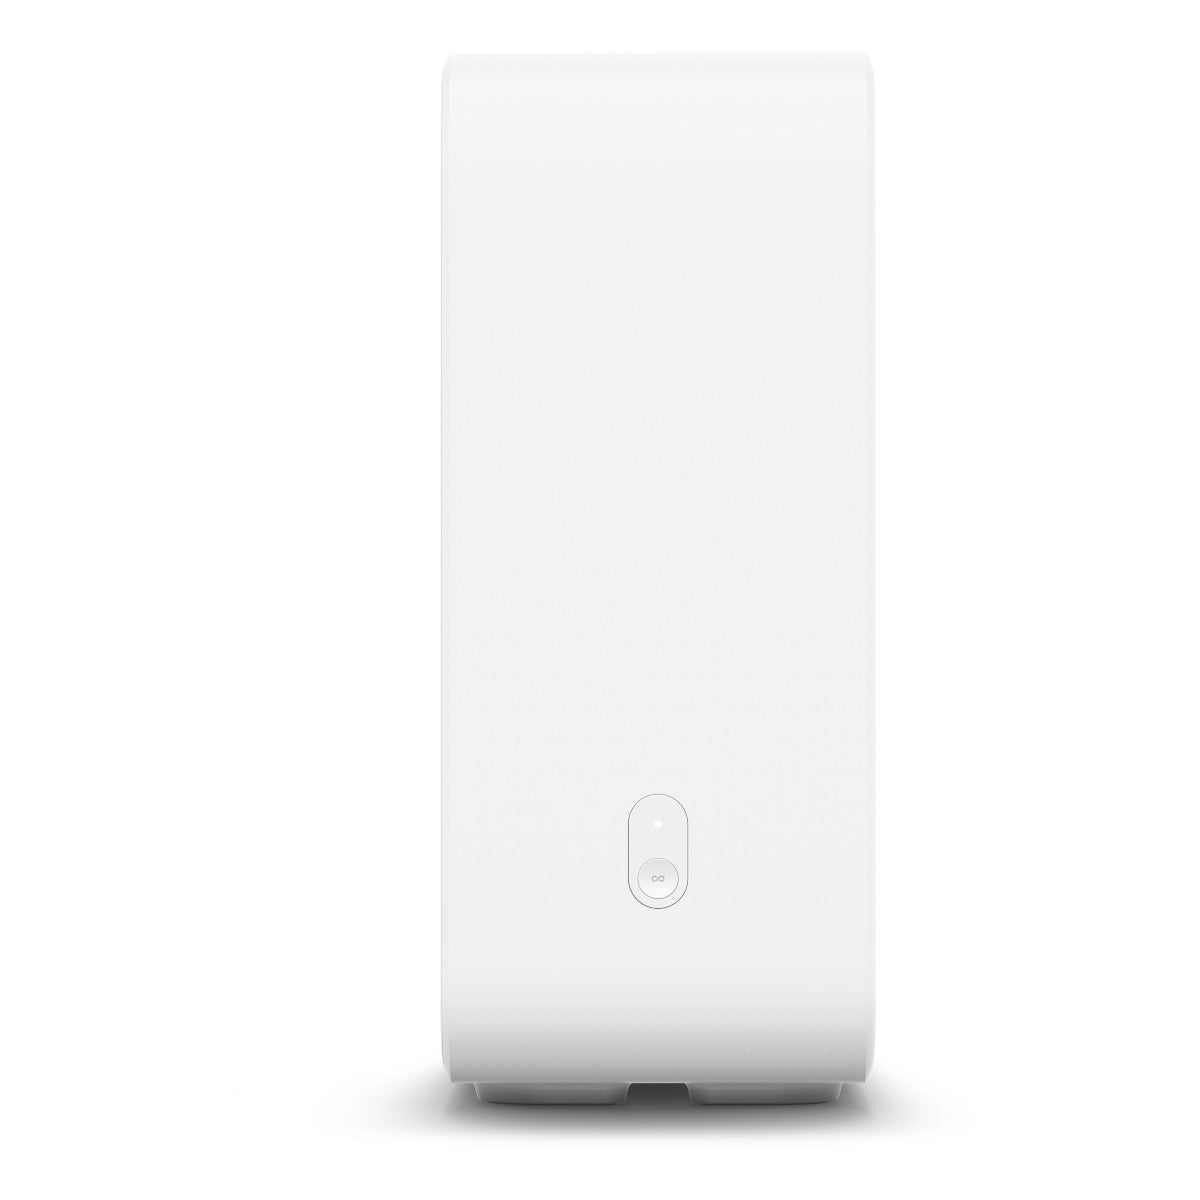 Sonos Sub (Gen 3) Wireless Subwoofer for Home Theater (White)